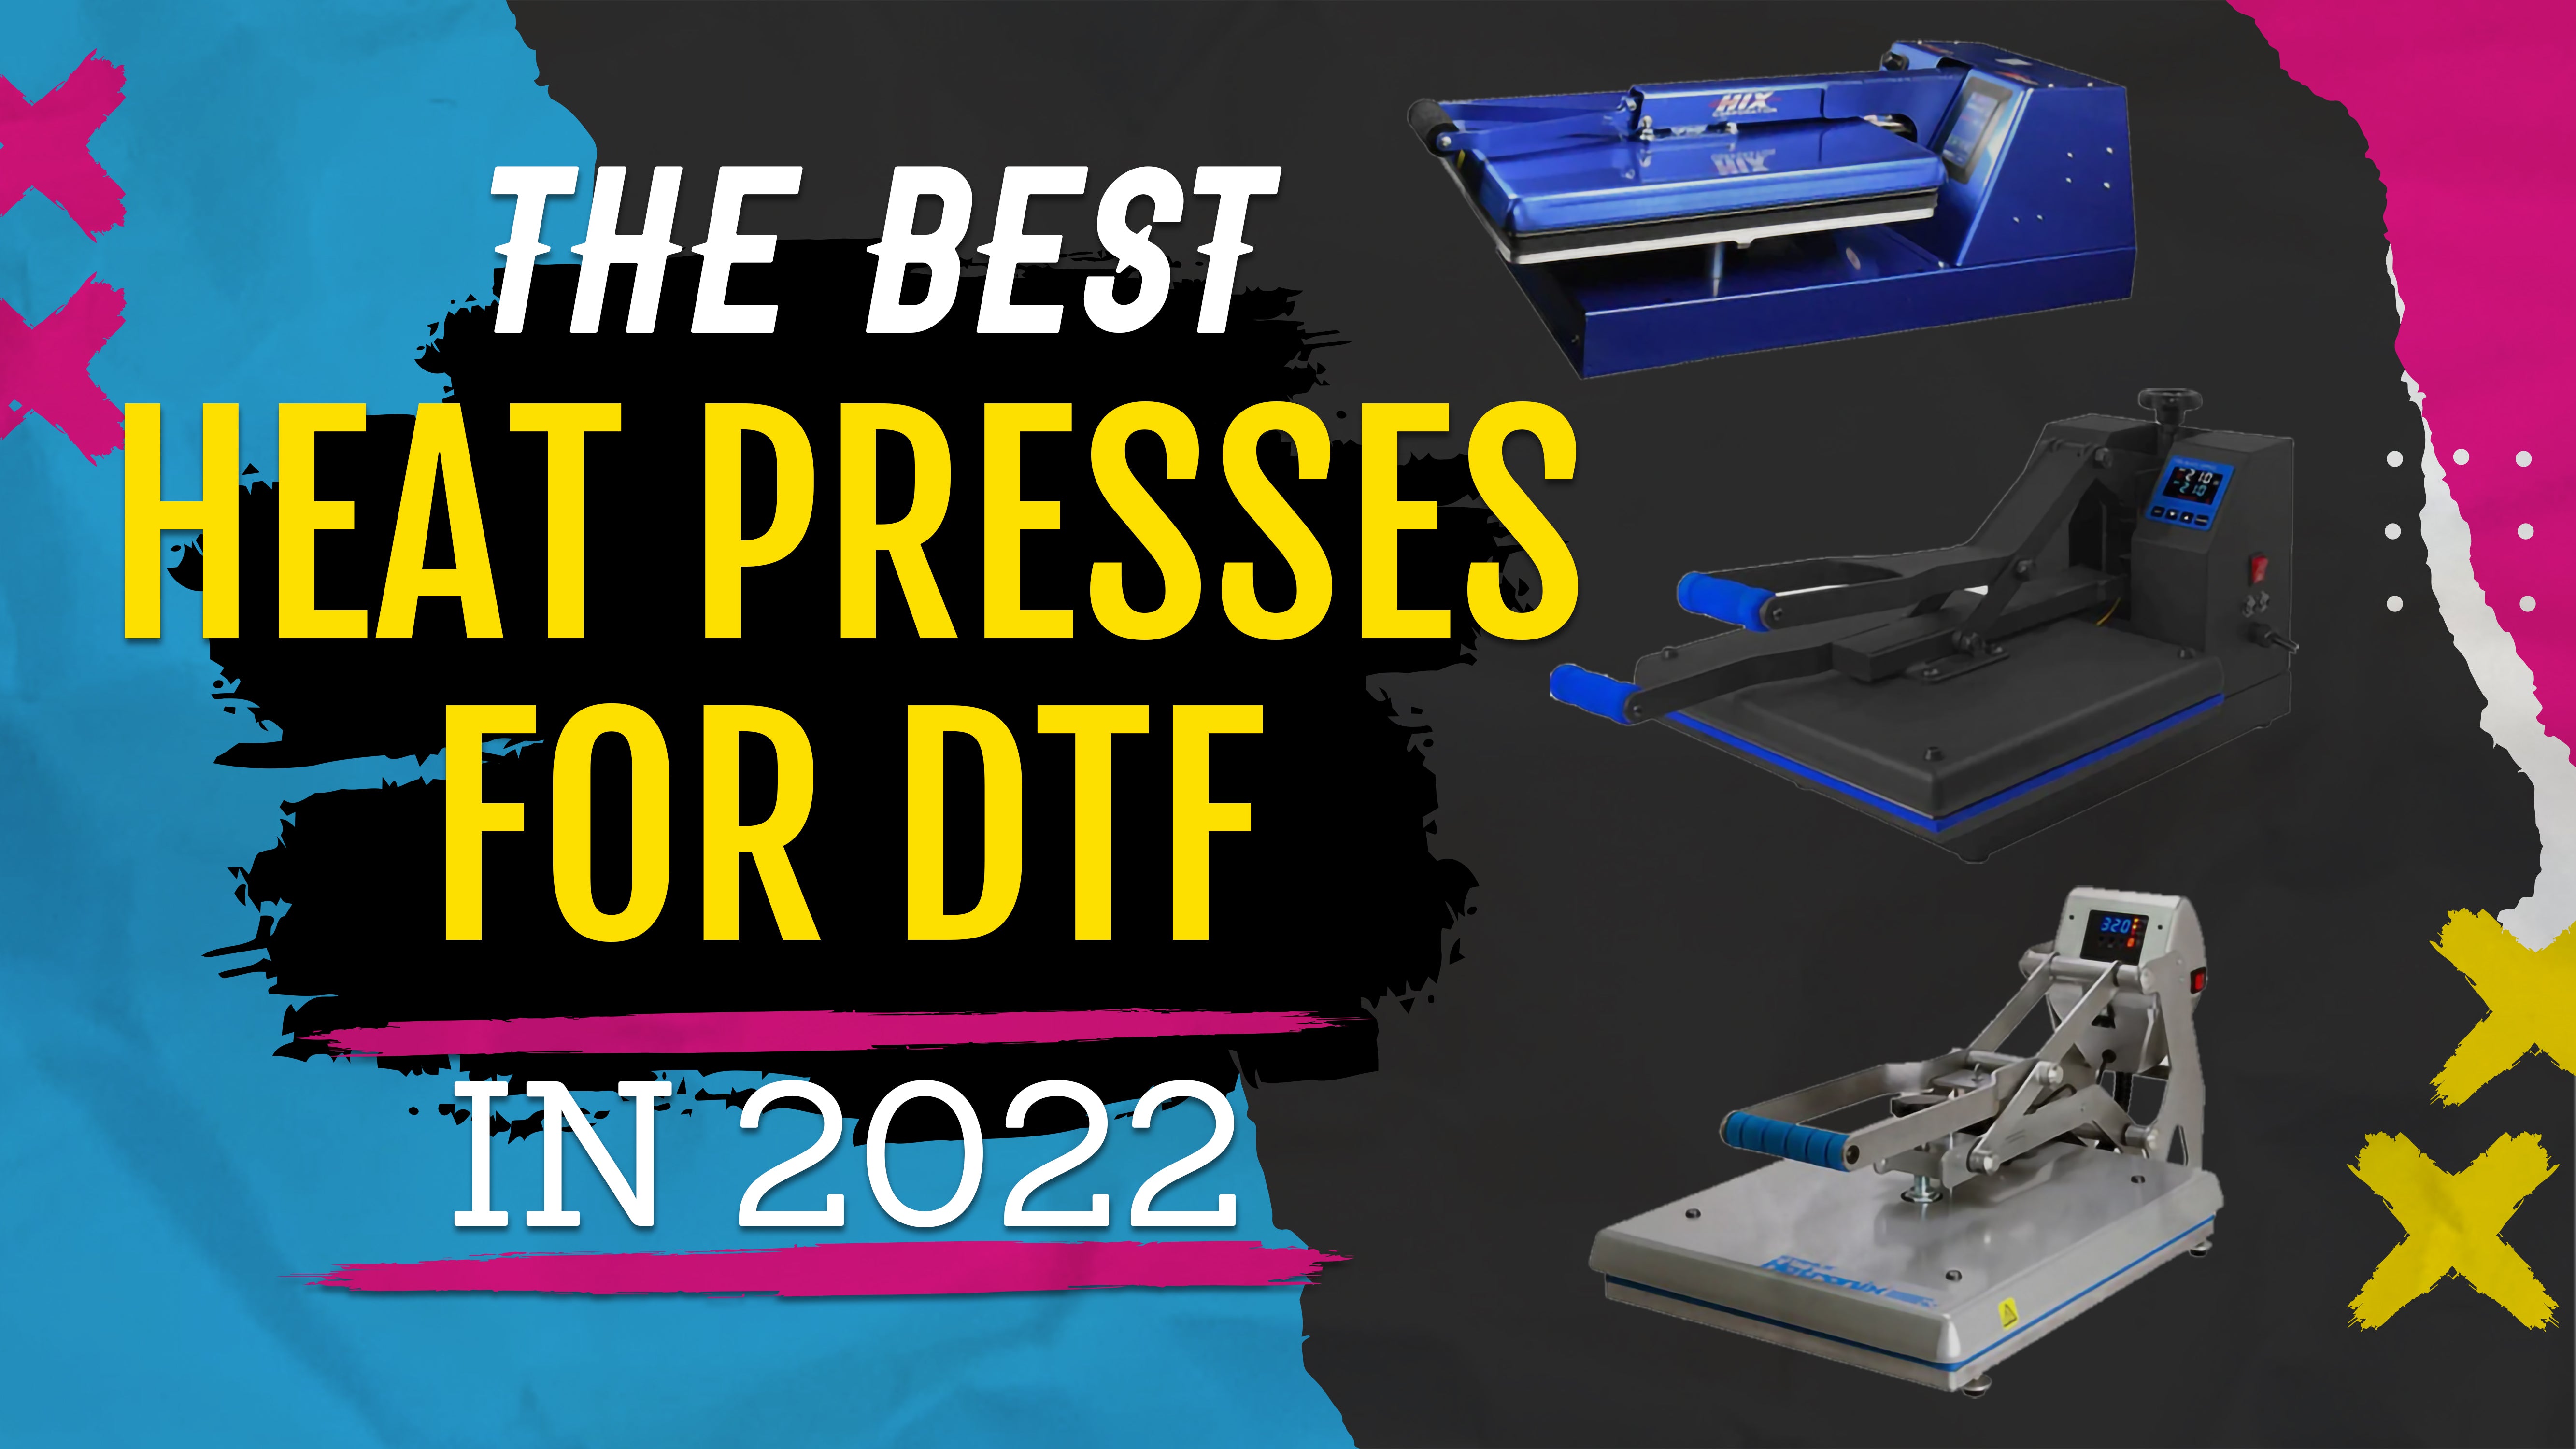 The Latest Trend is a Heat Press Away - Stahls' Blog